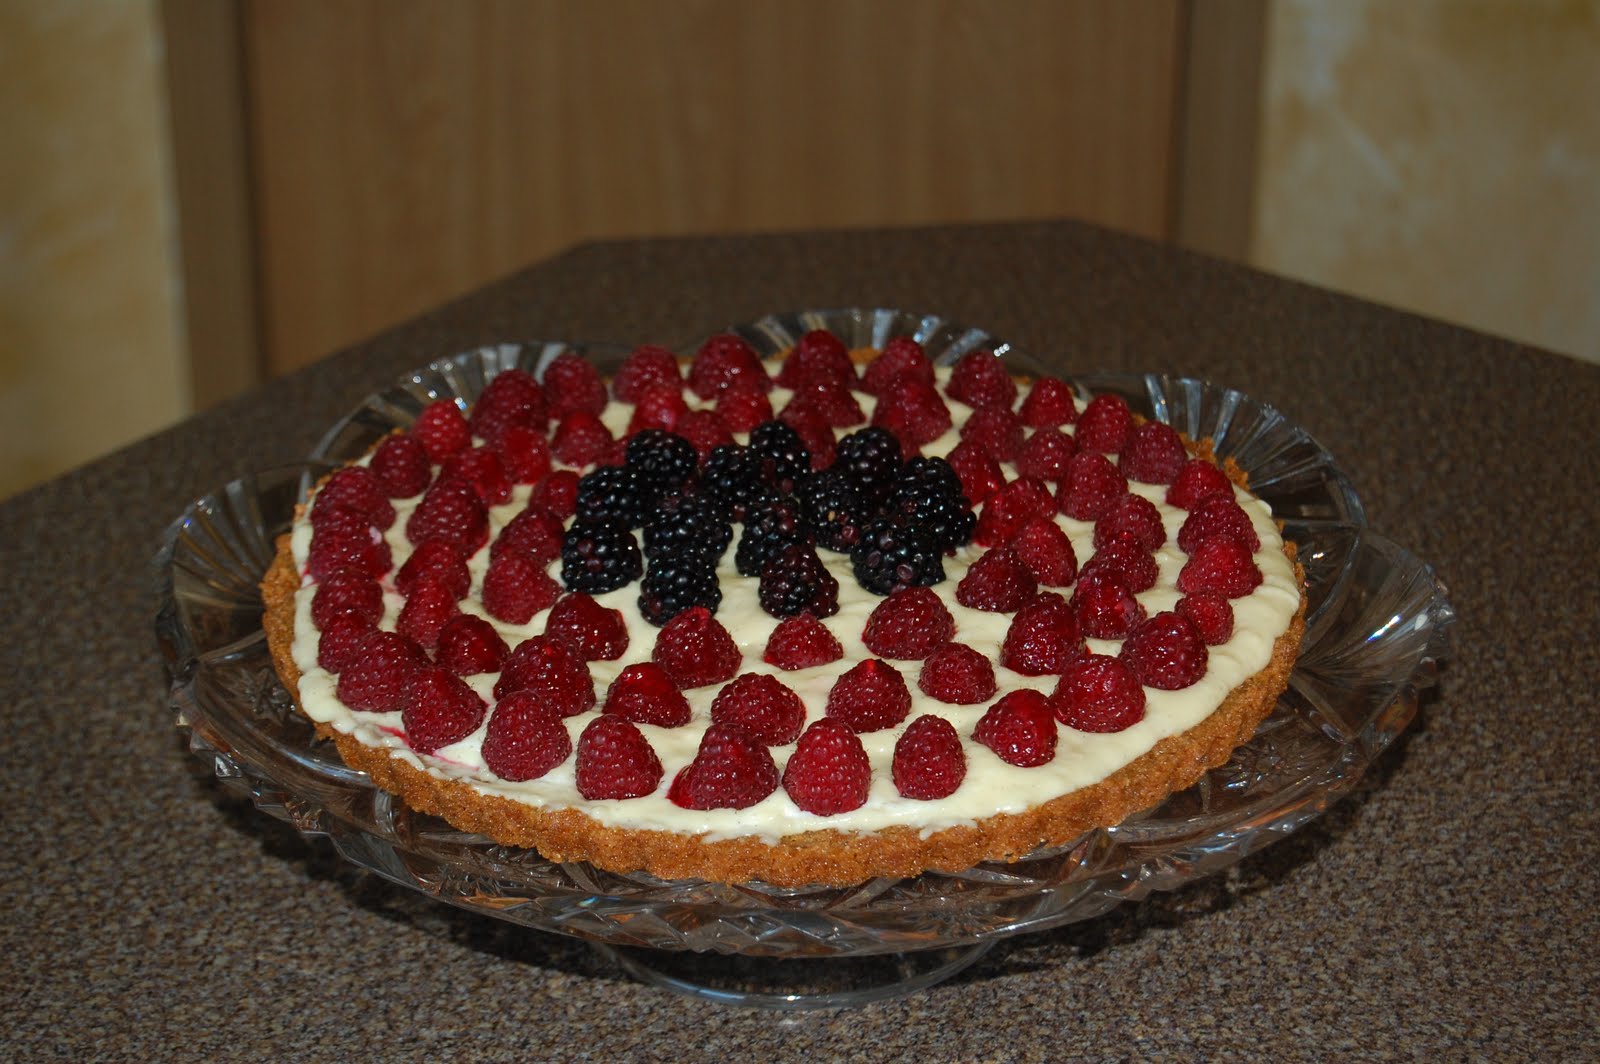 Kitchen Curiosities and more...: Raspberry and Blackberry Tart